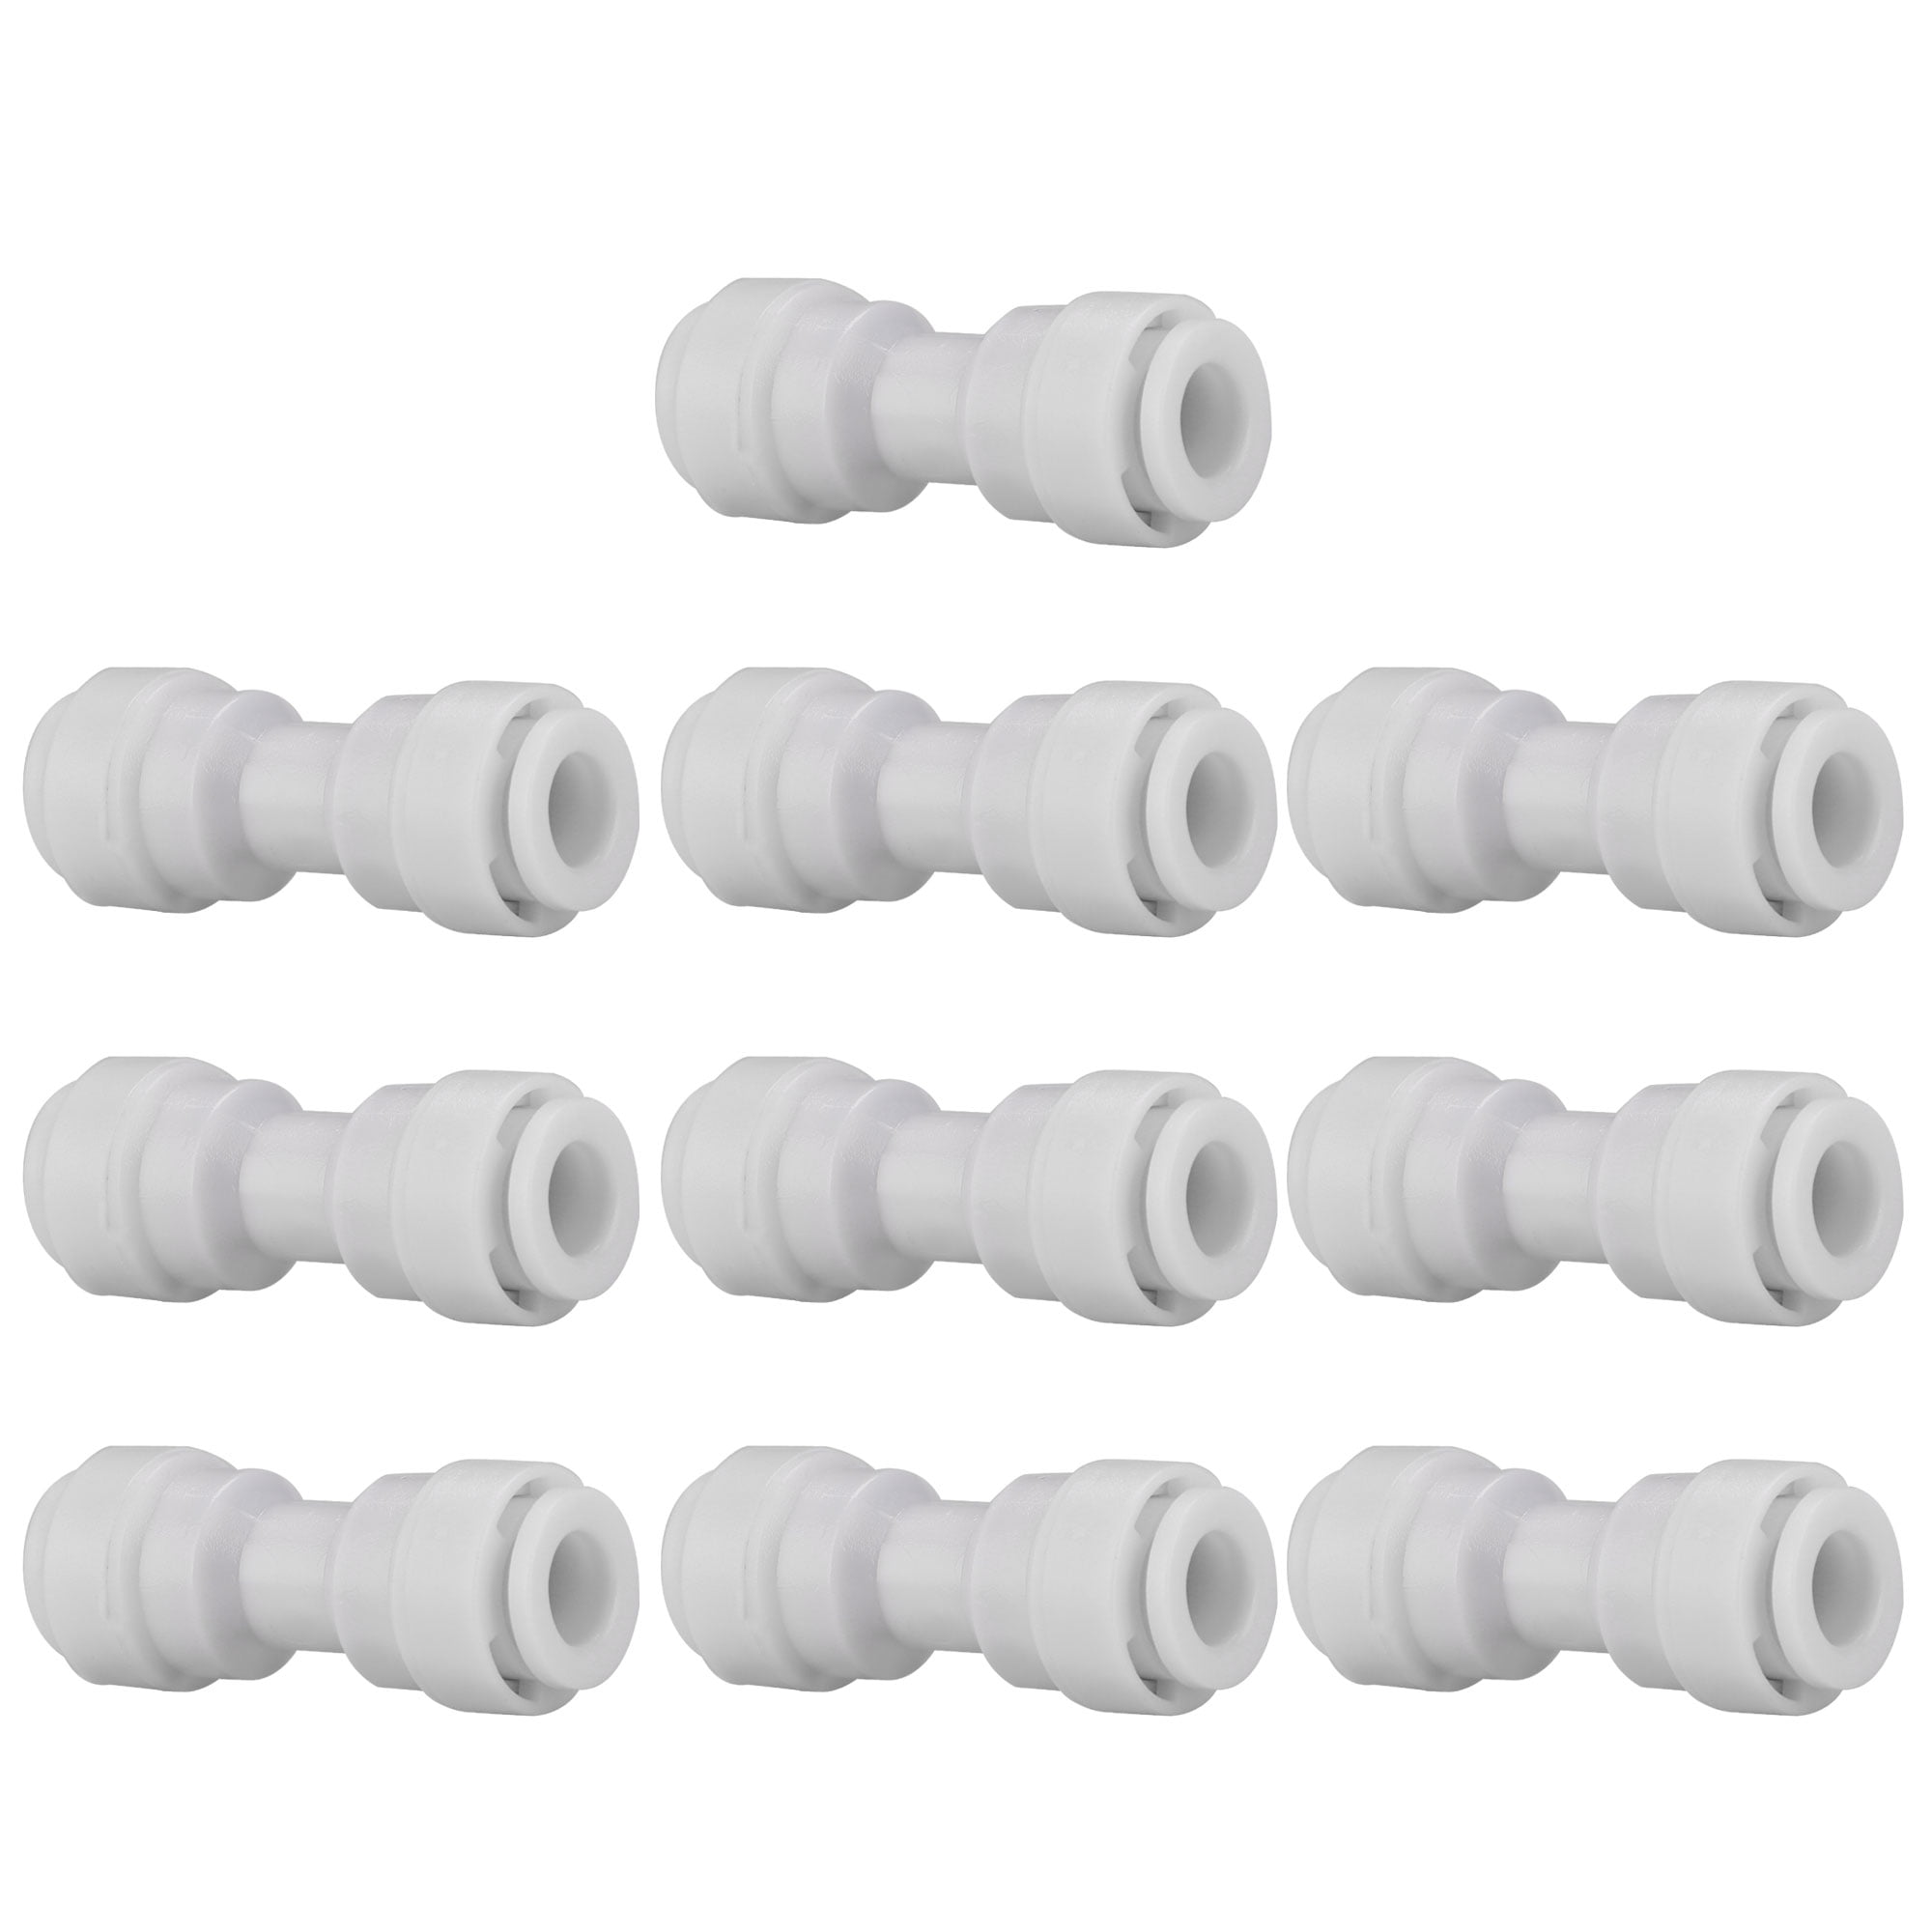 10pcs 1/4 Inch Straight Tube RO Quick Connector Water Filter Fittings Hose Tubing Connector